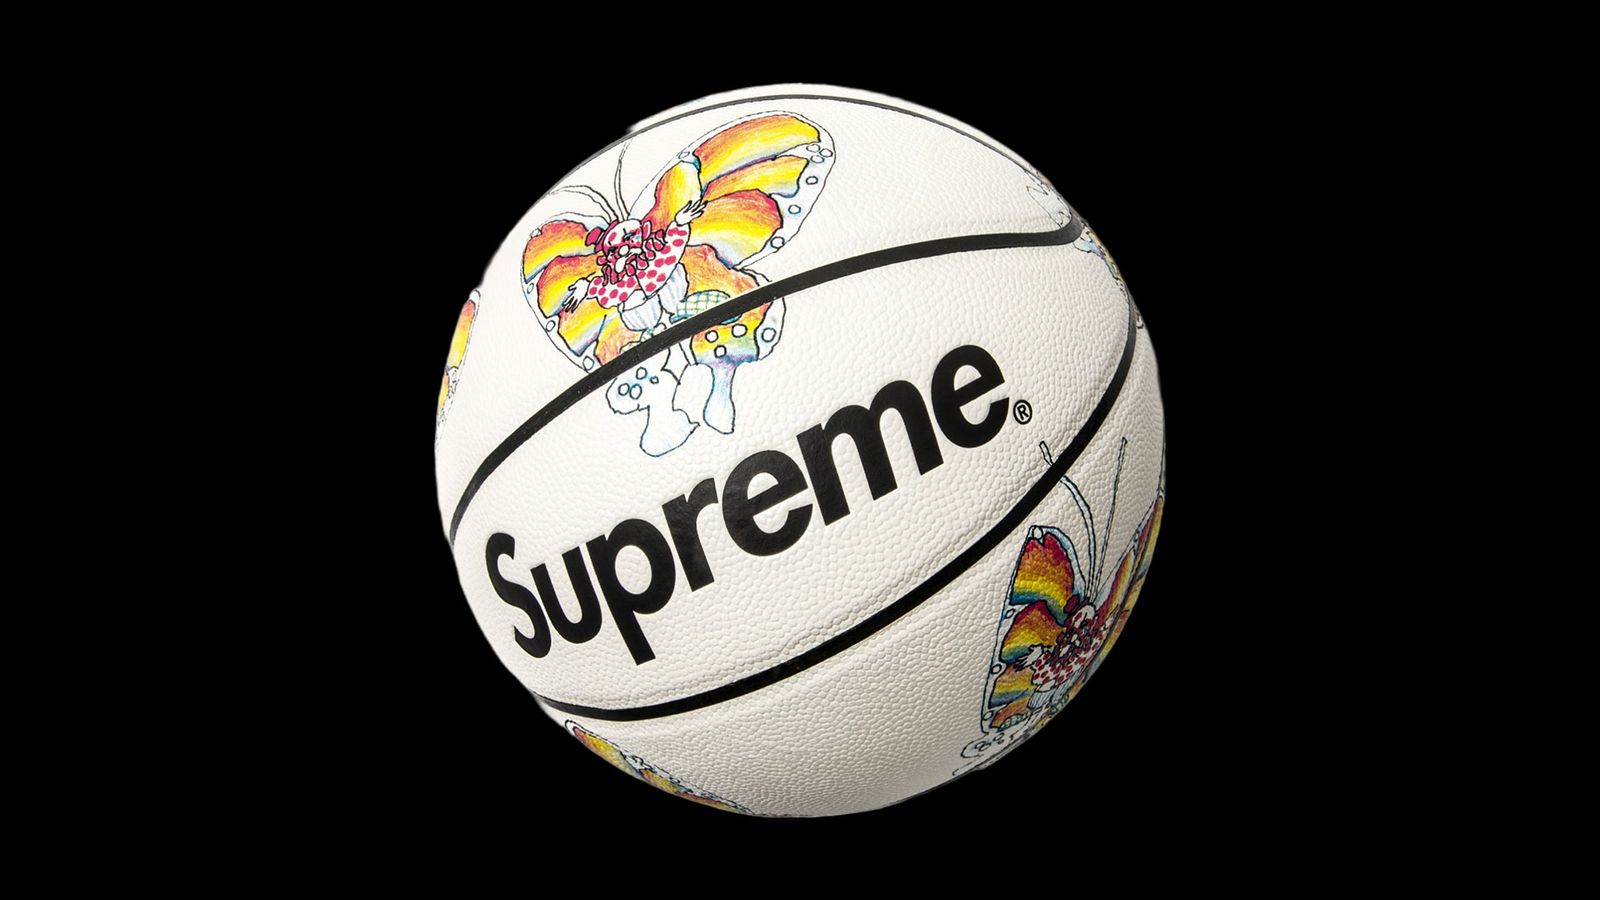 Supreme x Spalding Gonz Butterfly Basketball product image of a white basketball with a floral butterfly pattern.